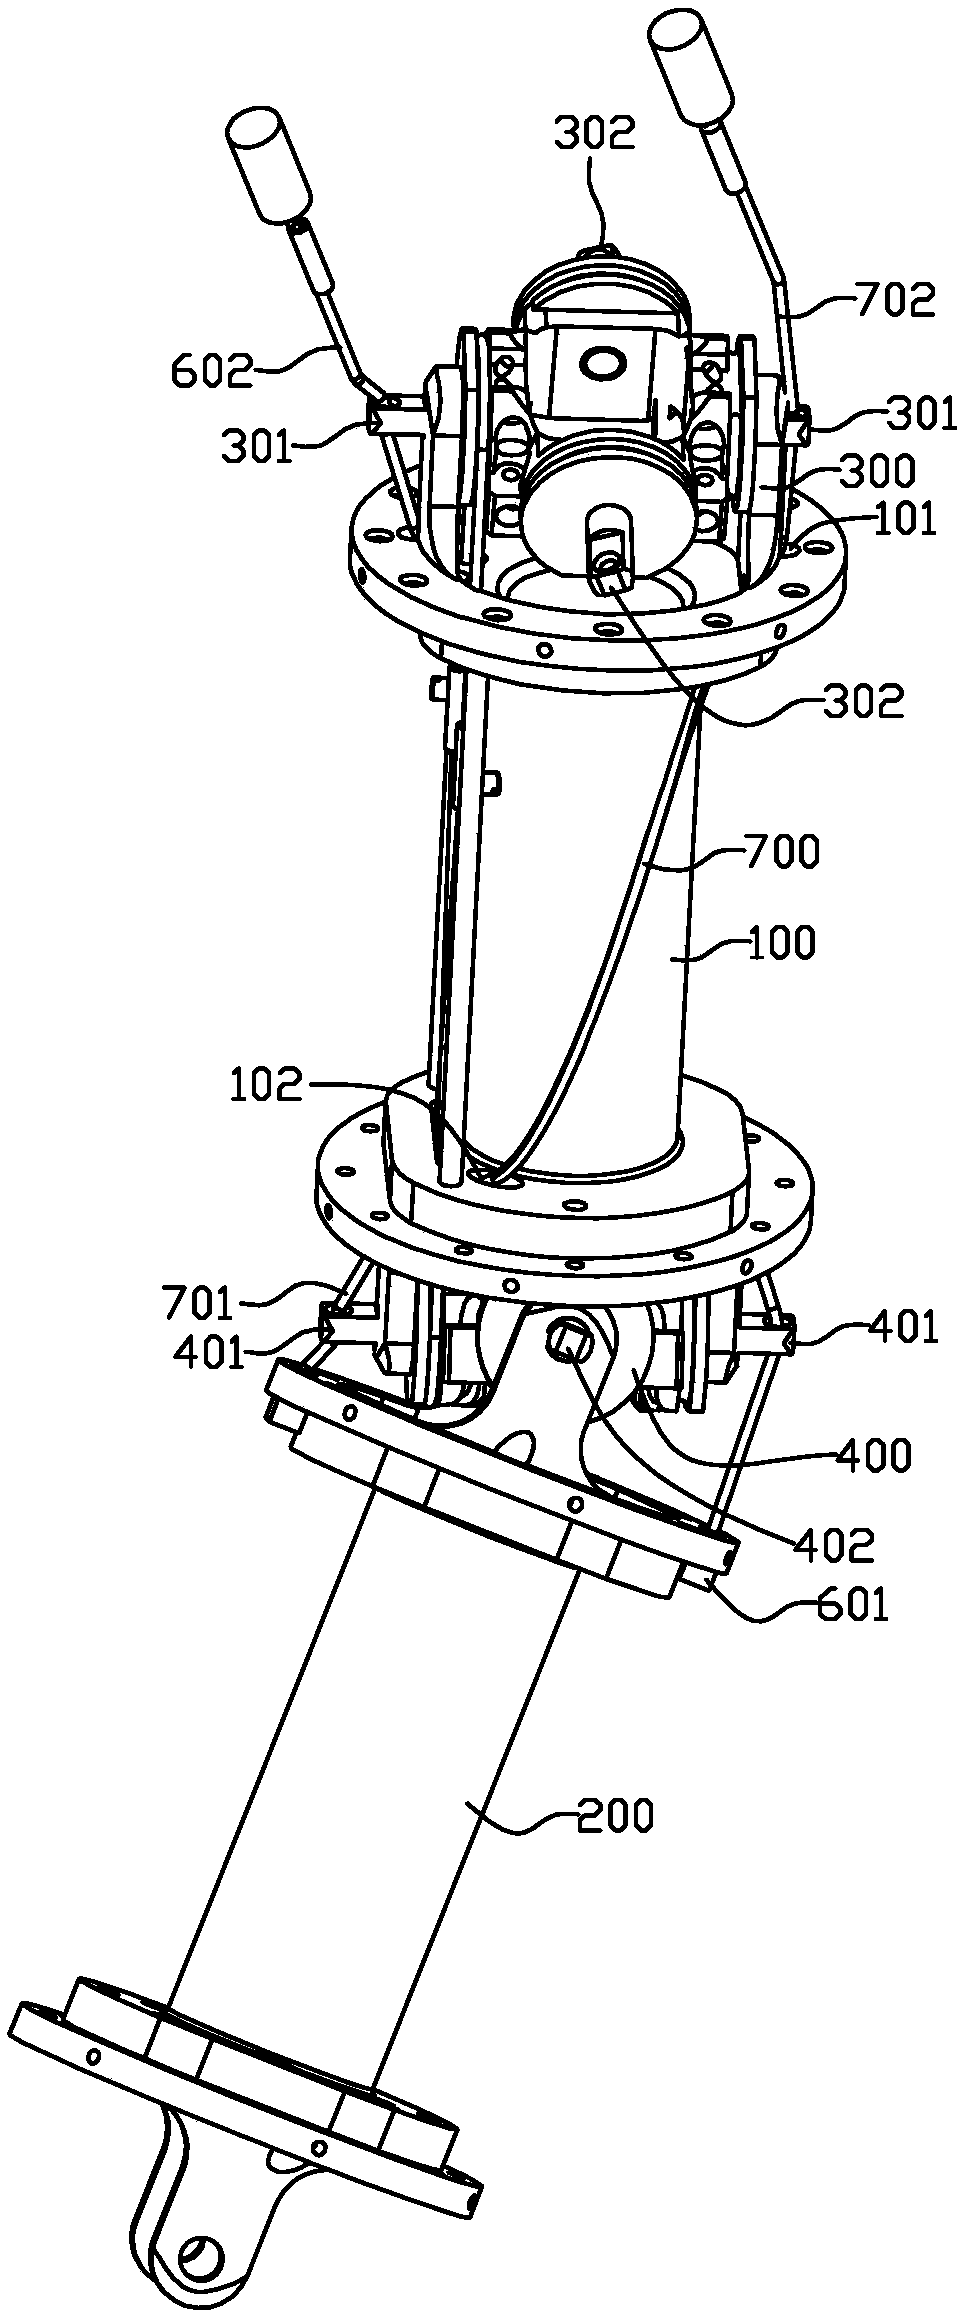 Two-freedom-degree linkage joint section and flexible mechanical arm